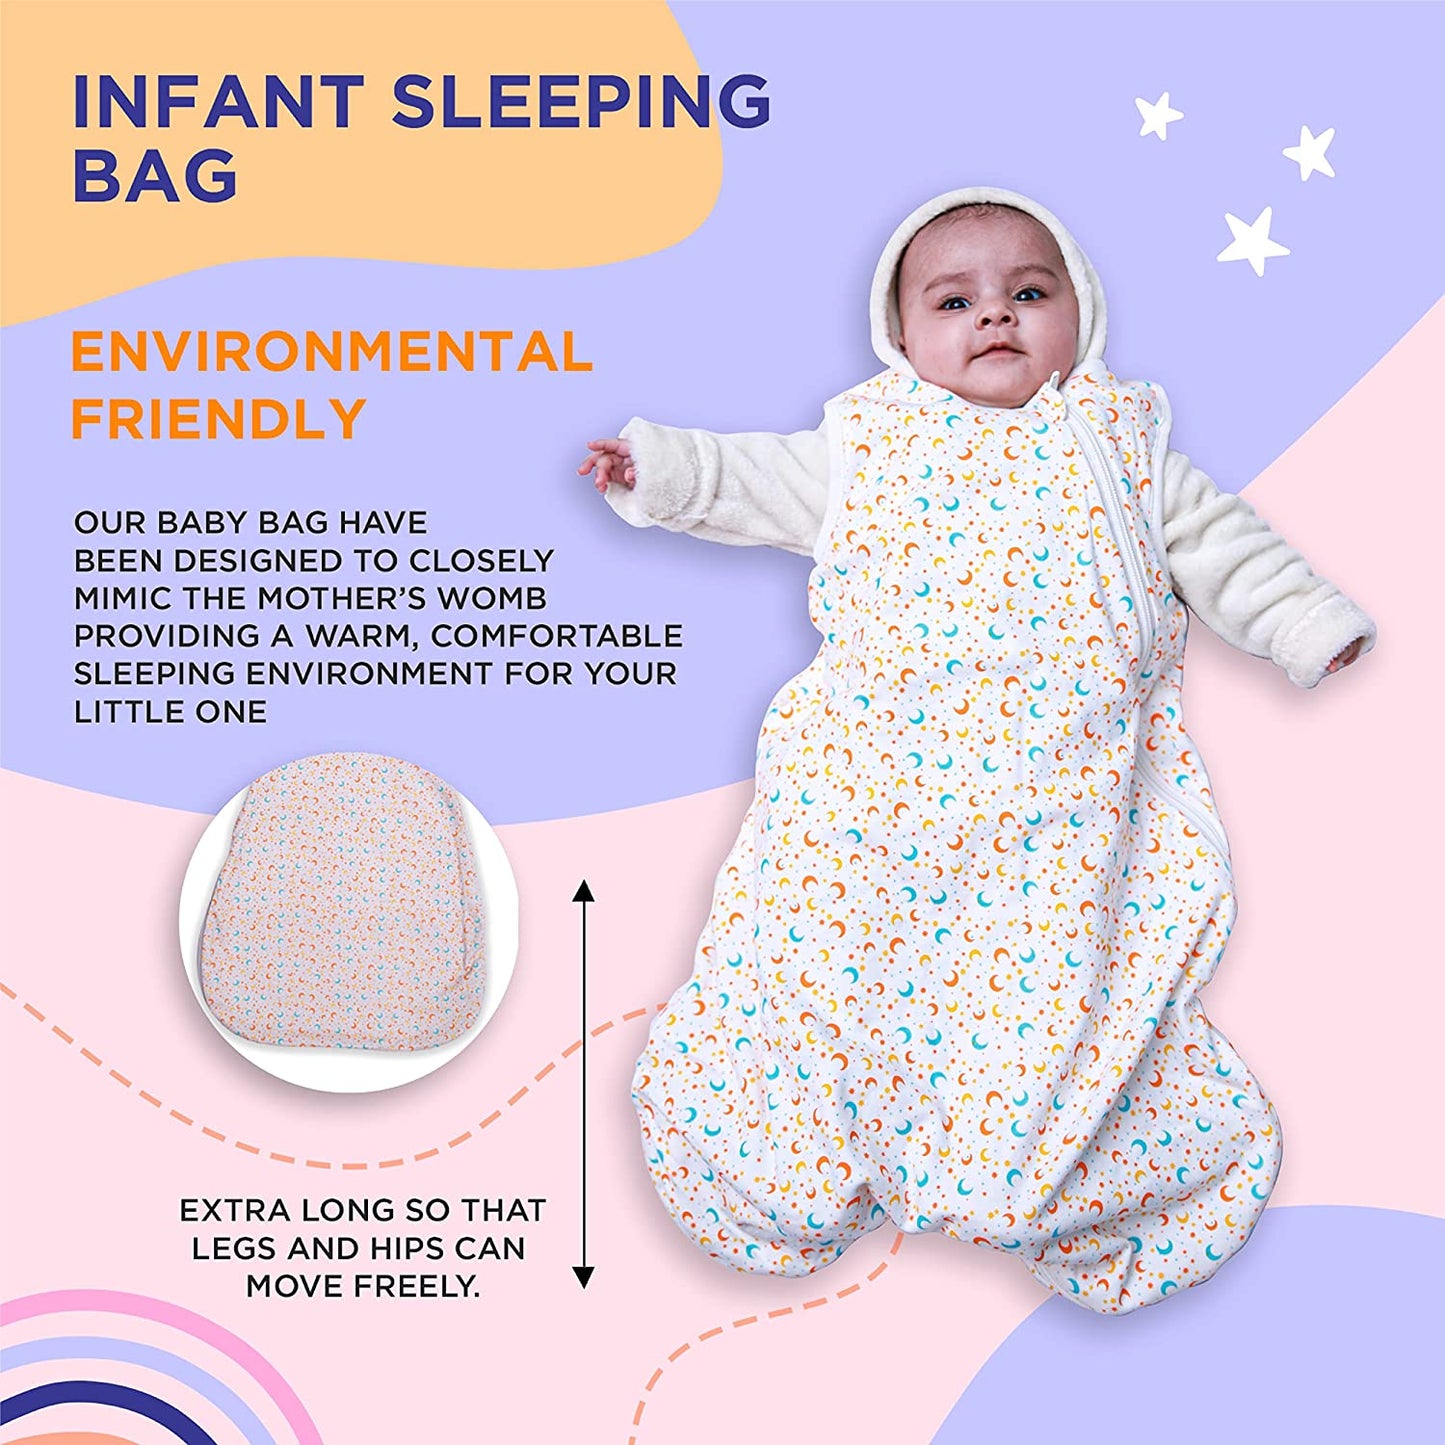 Baby Sleep Sack and Baby Bibs with 100% Cotton Material Toddler Sleeping Sack, Cute and Comfortable Baby Swaddle Sack has Adjustable Length for Infants and Toddlers (White, 6-15 Months)